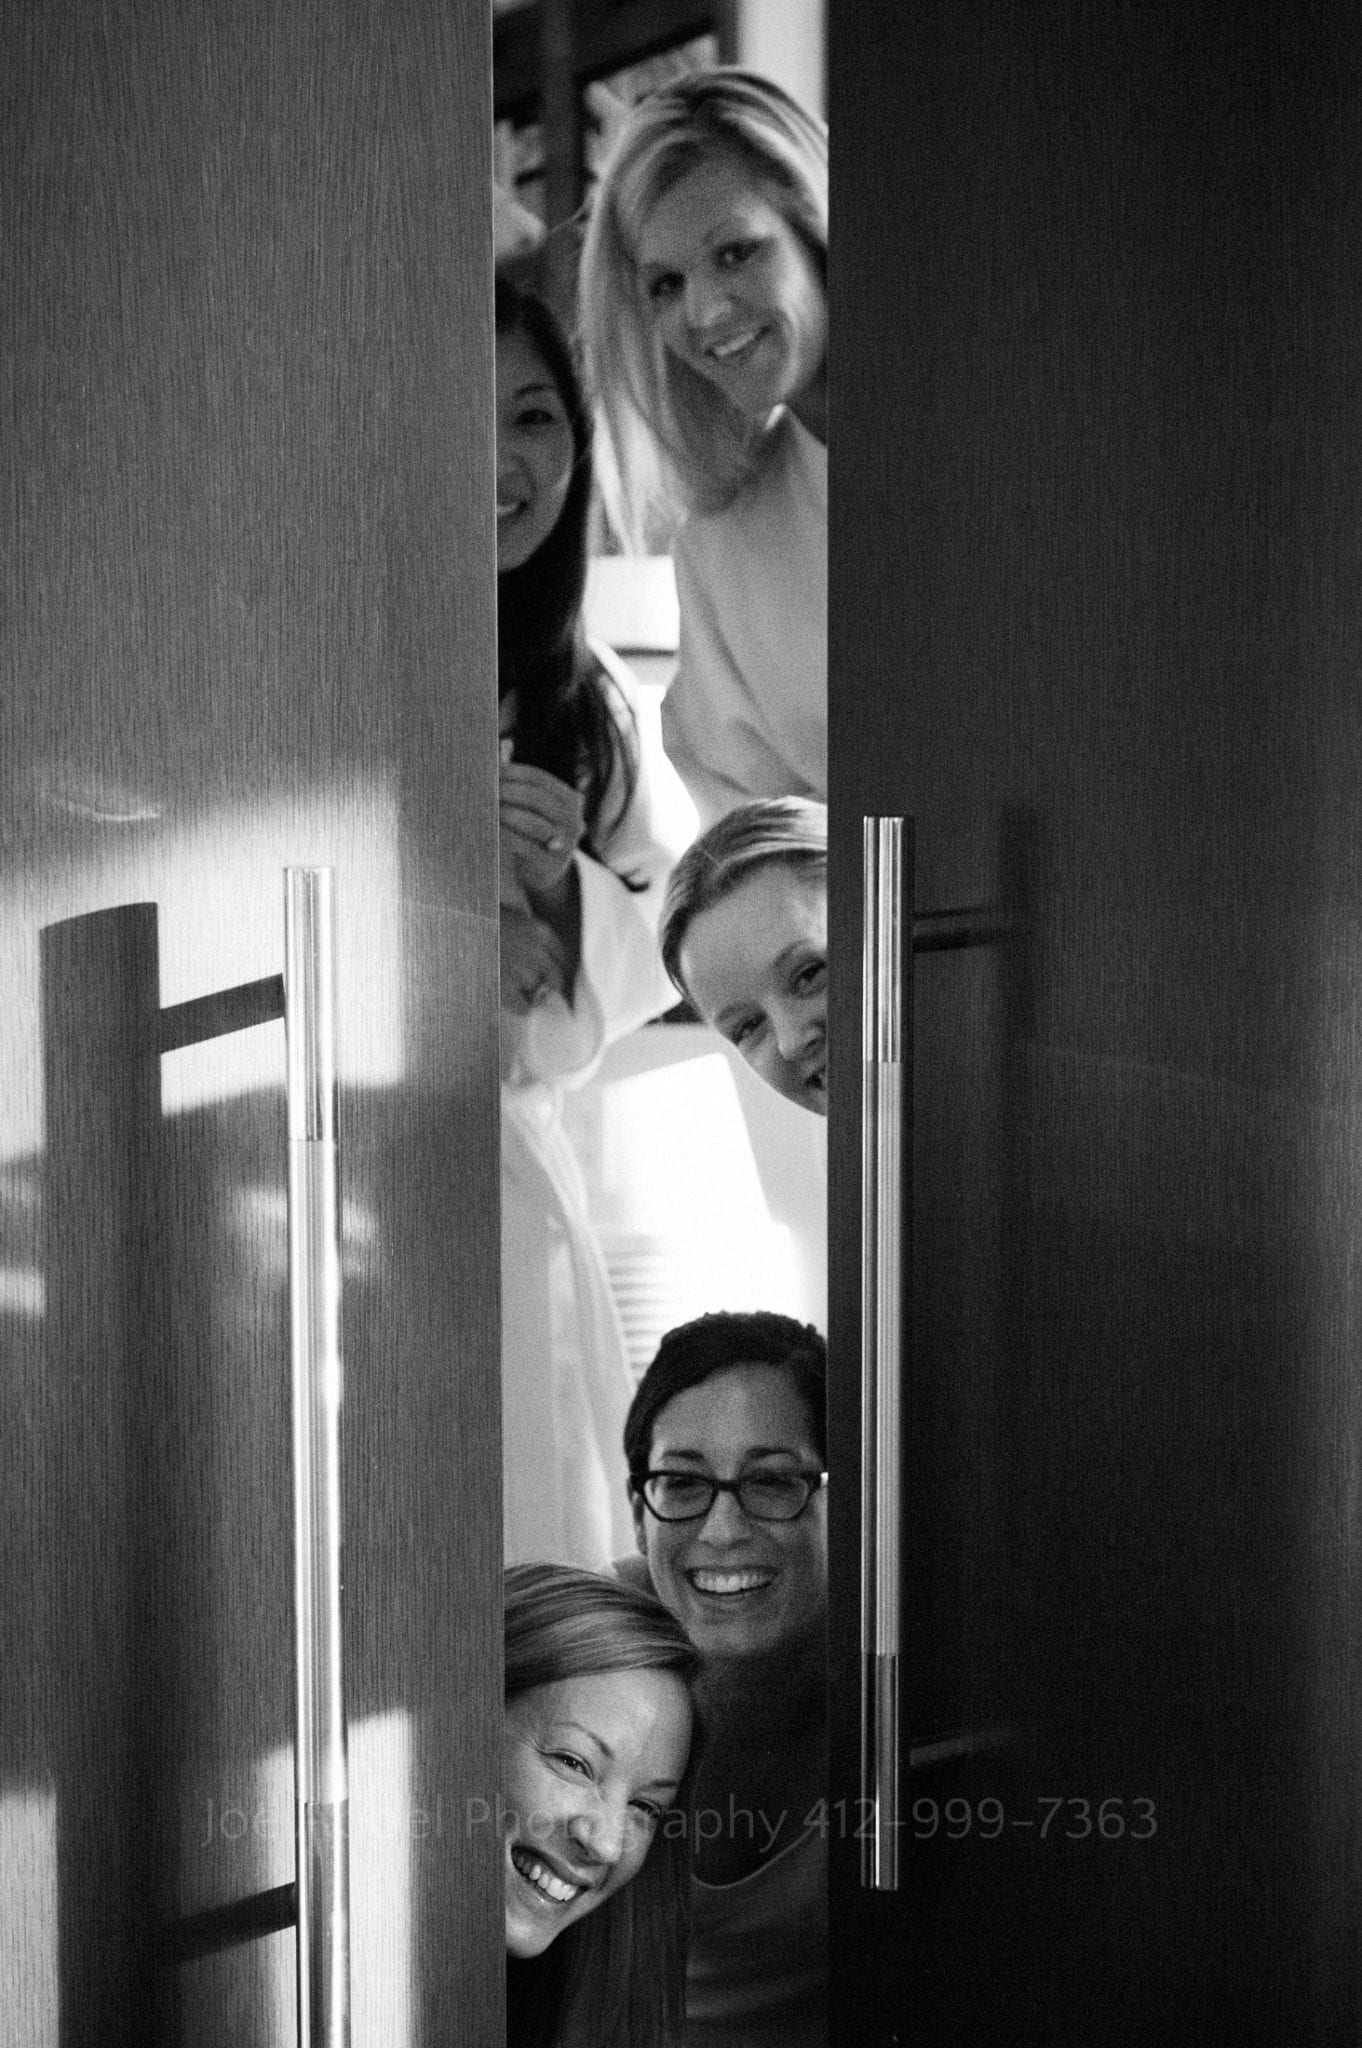 Four women cry as they peek through a partially opened door Fairmont Hotel Pittsburgh Weddings.